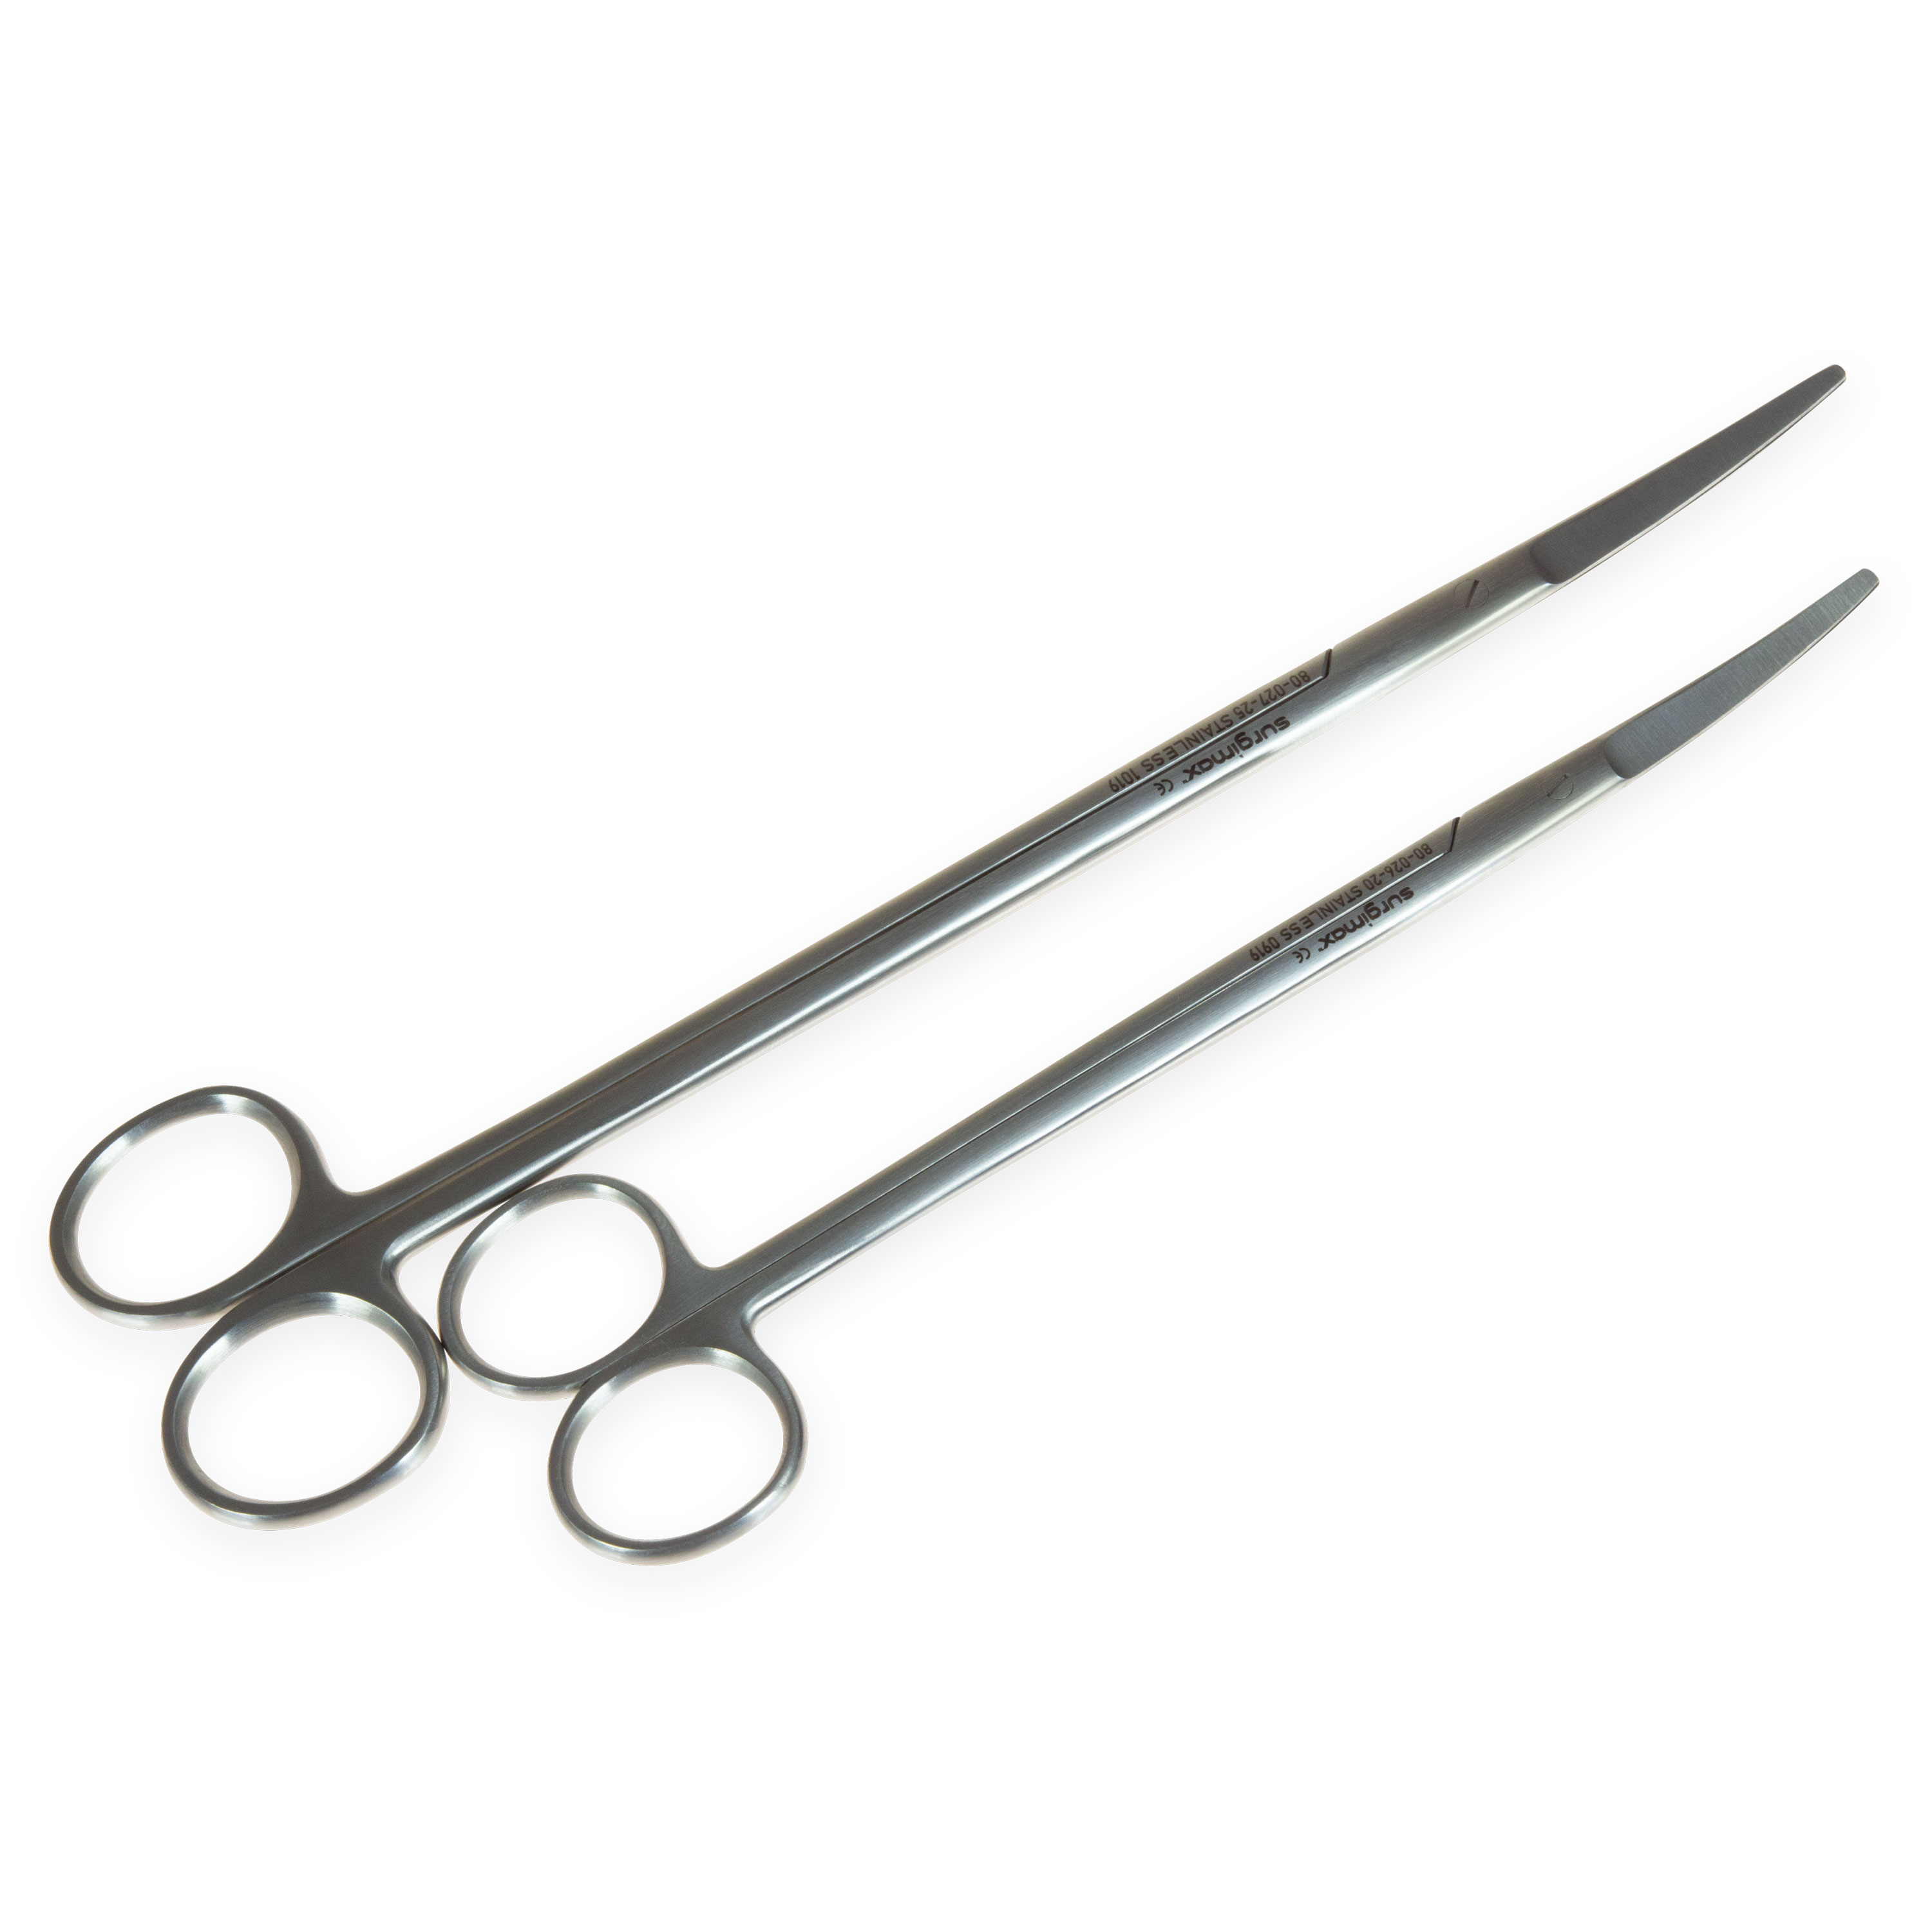 Mayo Scissors short curved blades no tips